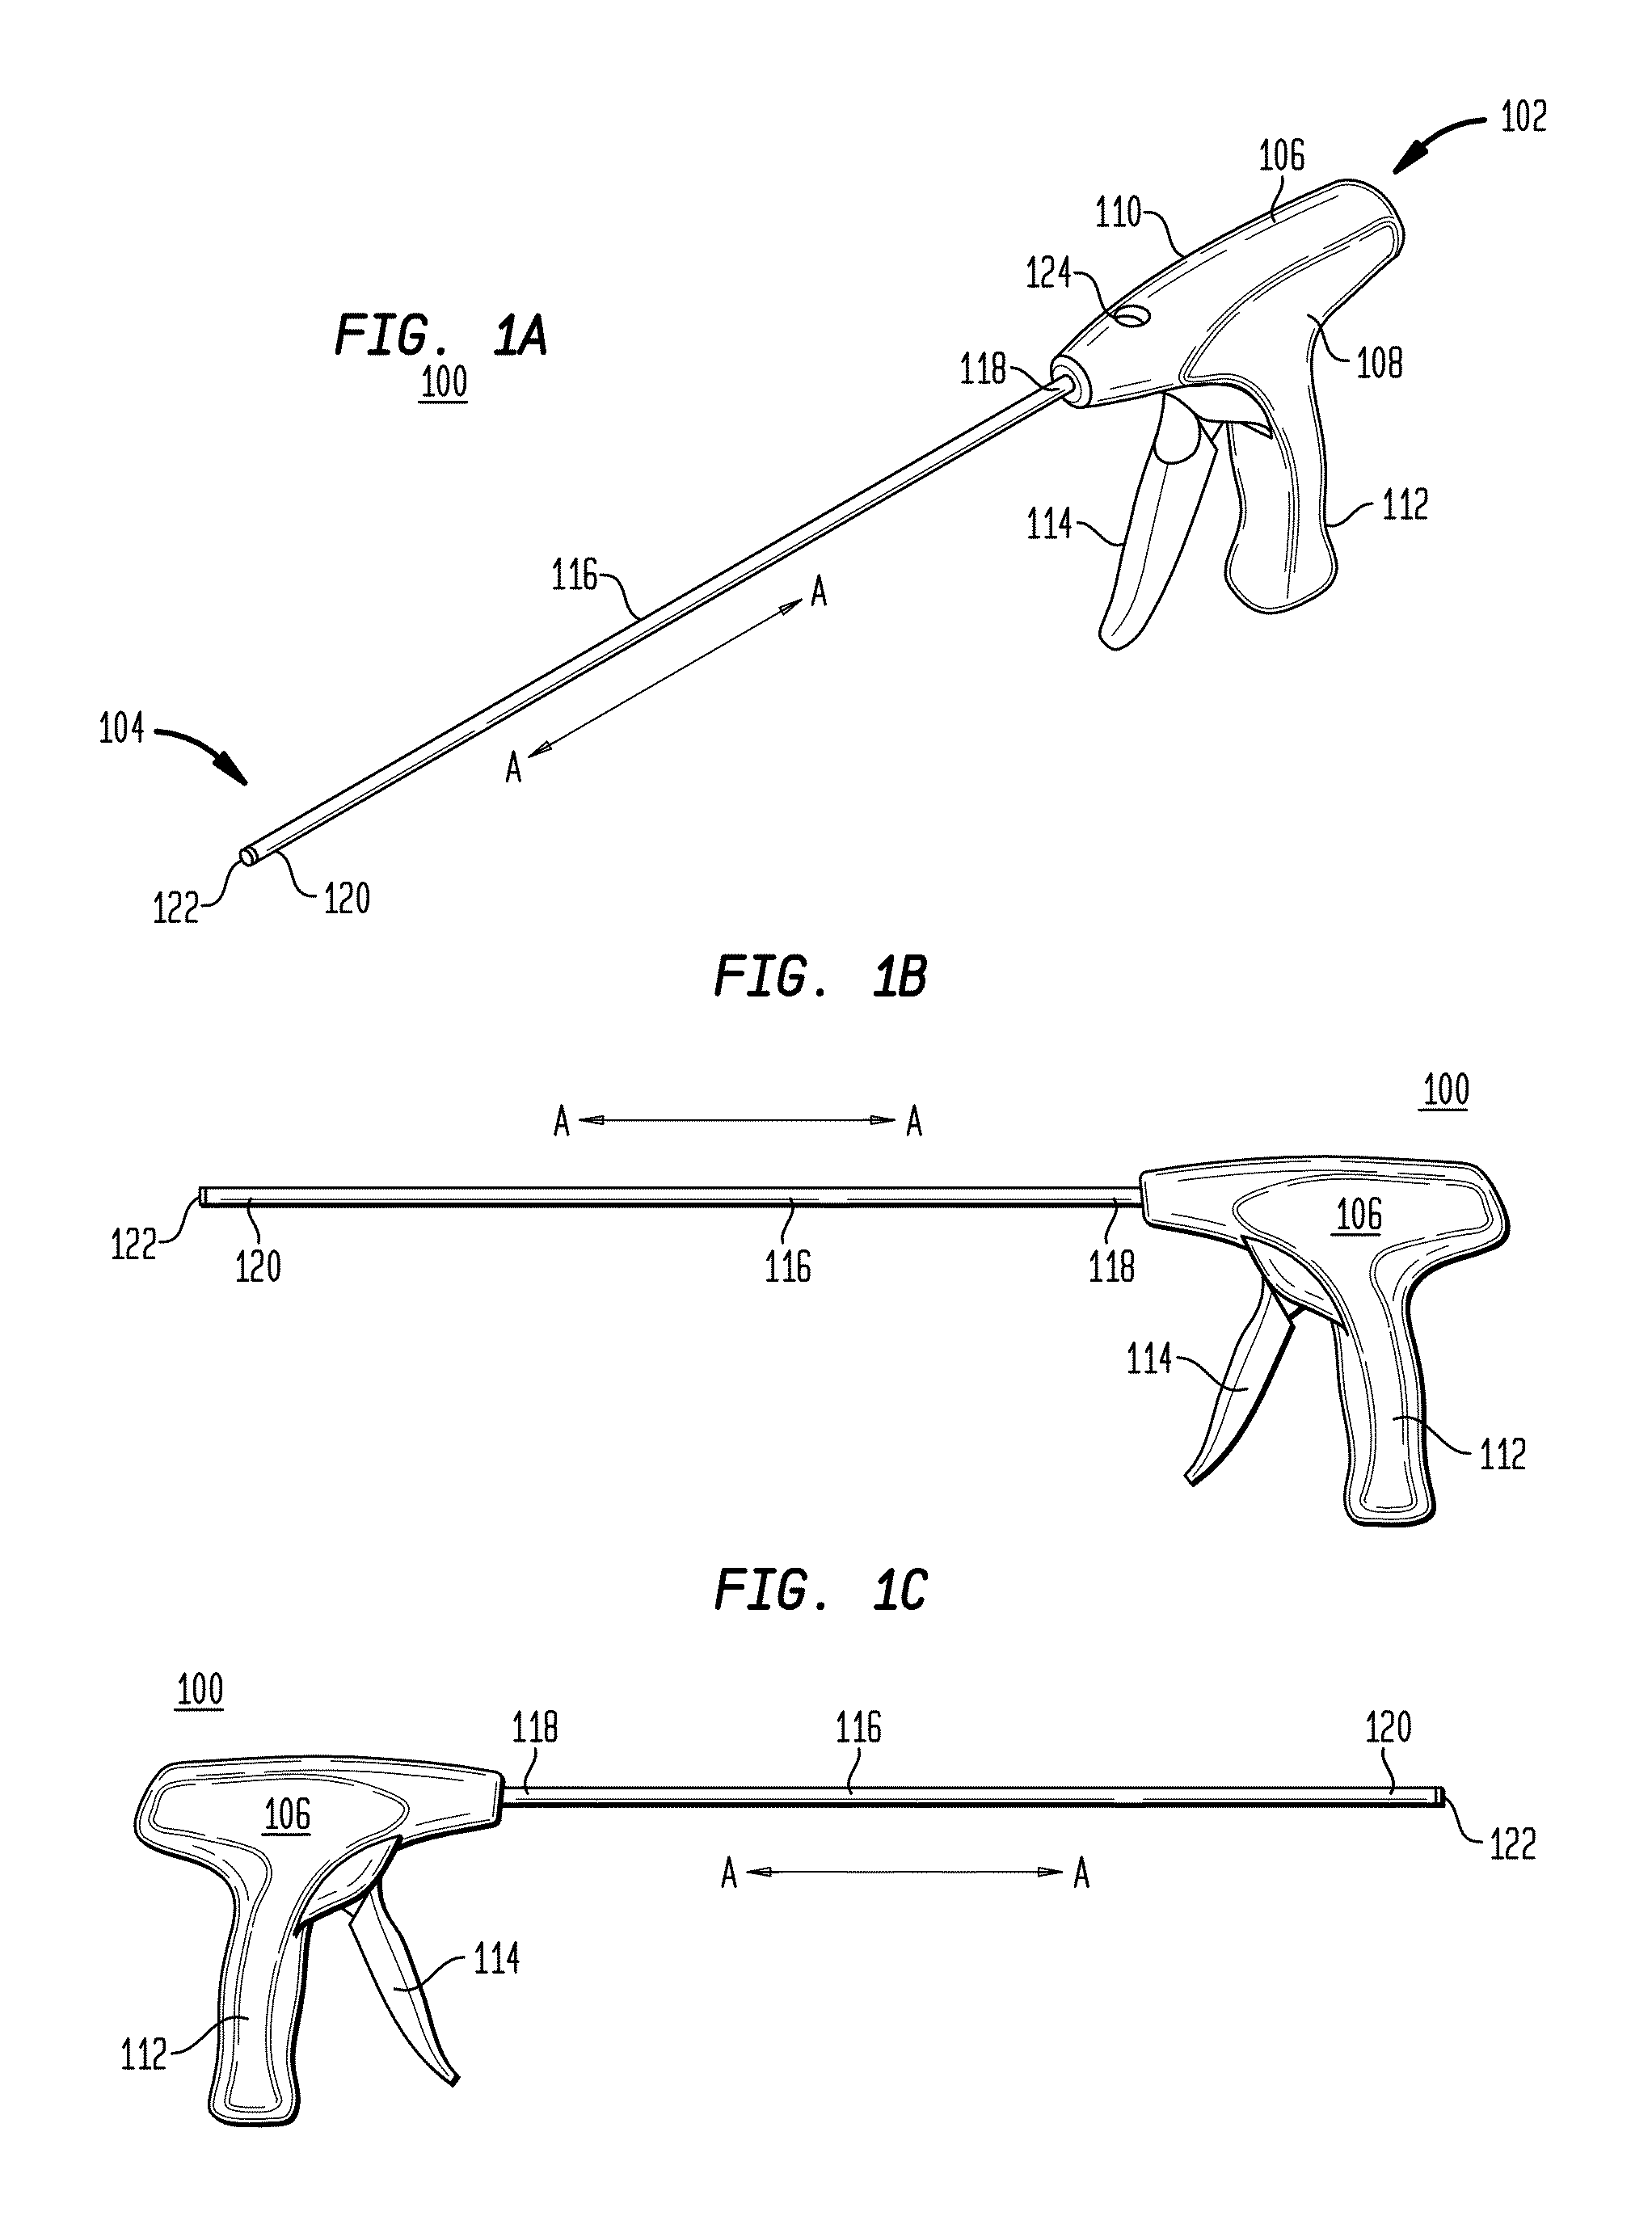 Surgical fasteners having articulating joints and deflectable tips